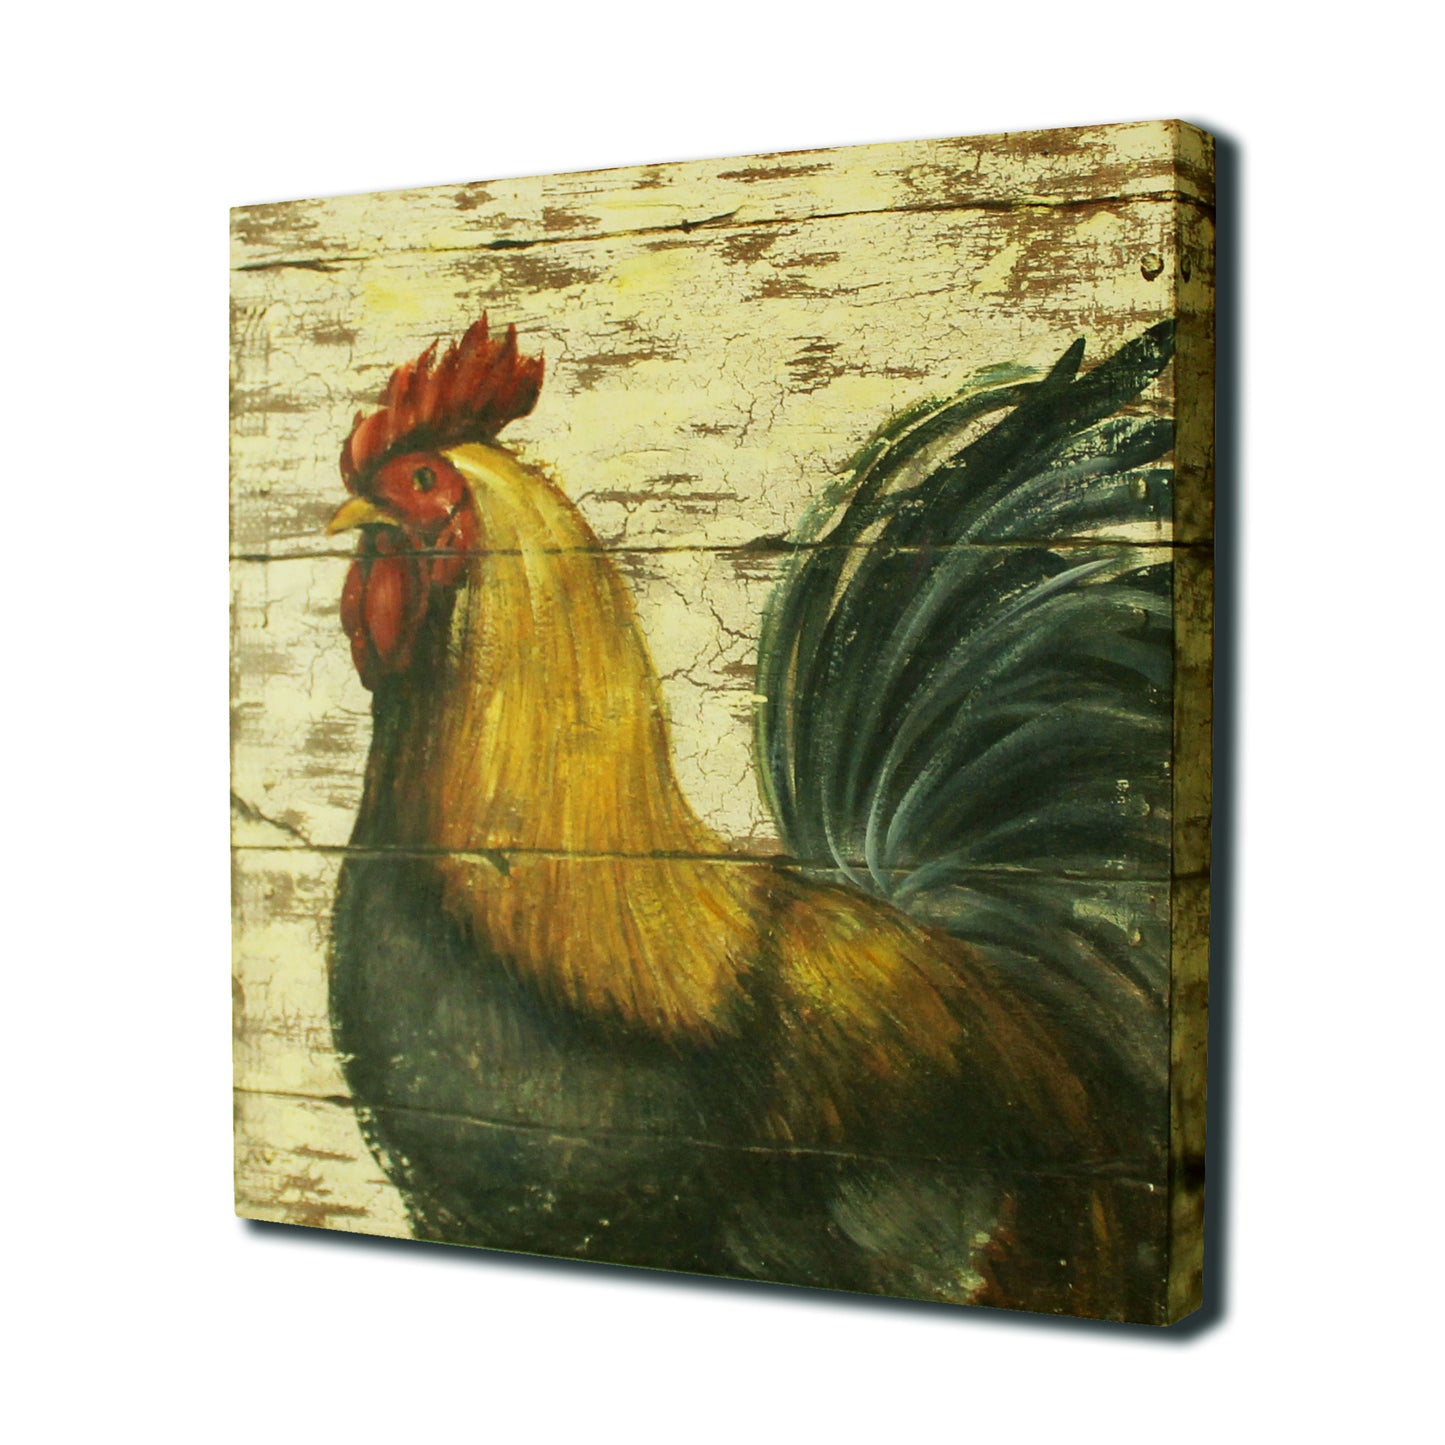 CVHOMEDECO. Primitives Rustic Hand Painted Wooden Frame Wall Hanging 3D Painting Decoration Art, Rooster Design, 14 x 14 Inch